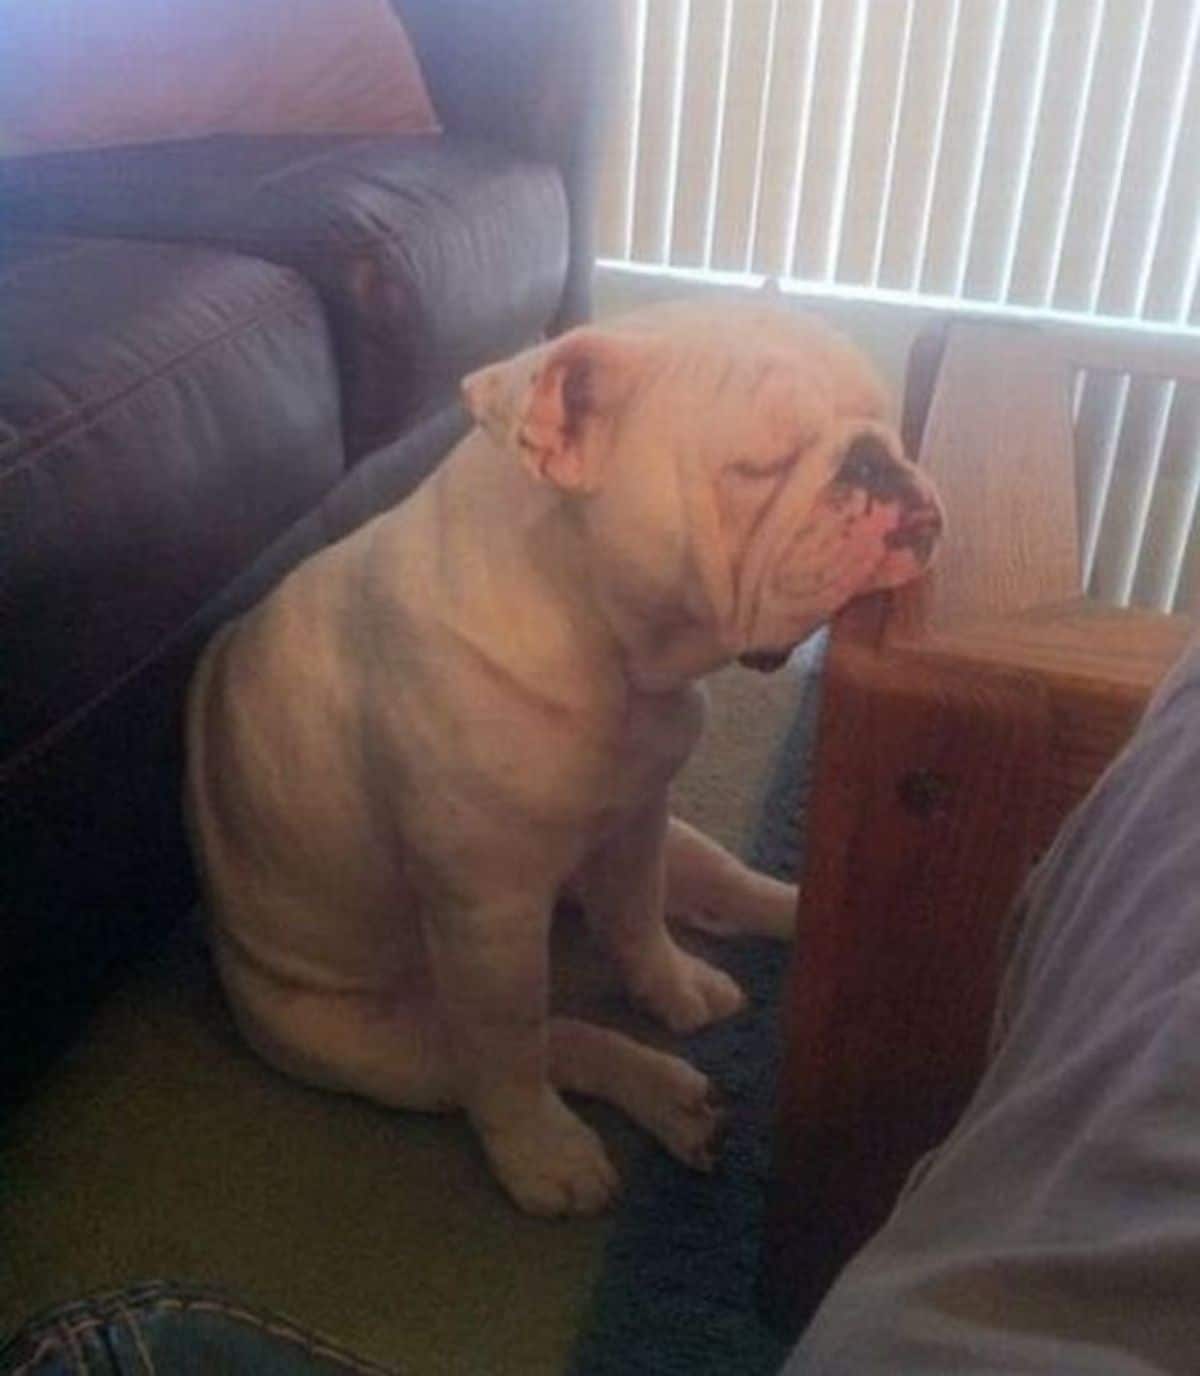 white bulldog sitting and fallen asleep with the chin resting on a coffee table